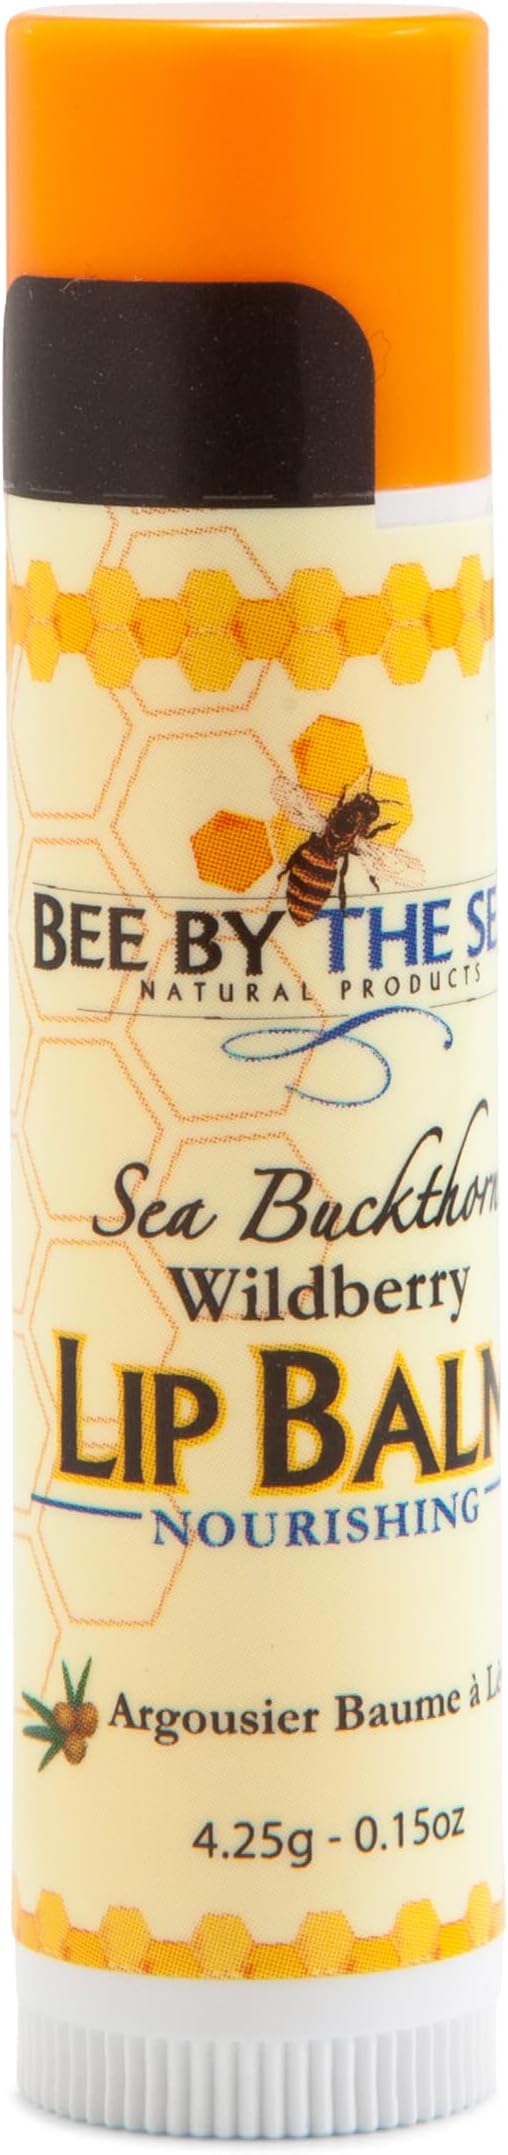 Bee By the Sea Moisturizing, Soothing and Nourishing Lip Balm with Sea Buckthorn, Natural Beeswax (Wildberry)